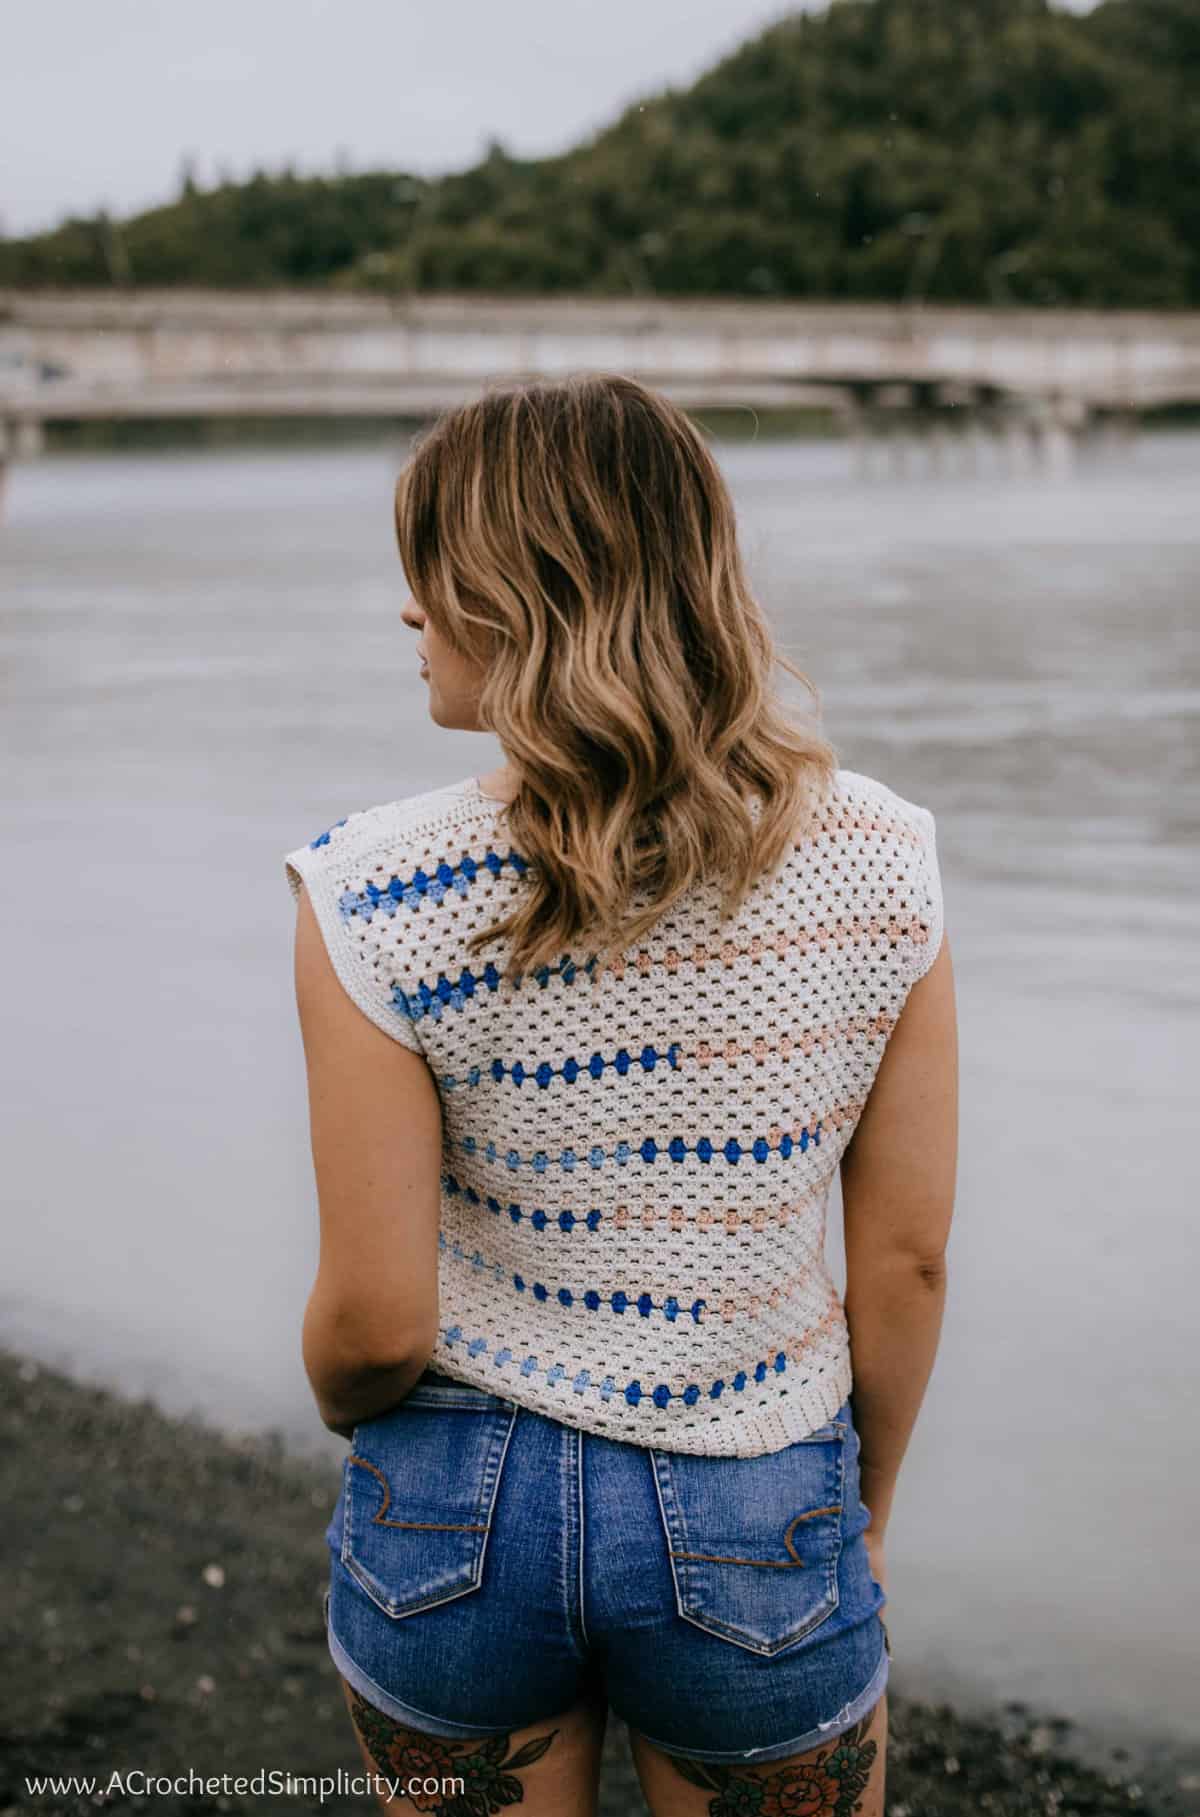 Backside of a model wearing a crochet granny stitch top in cream, pink and blue.
